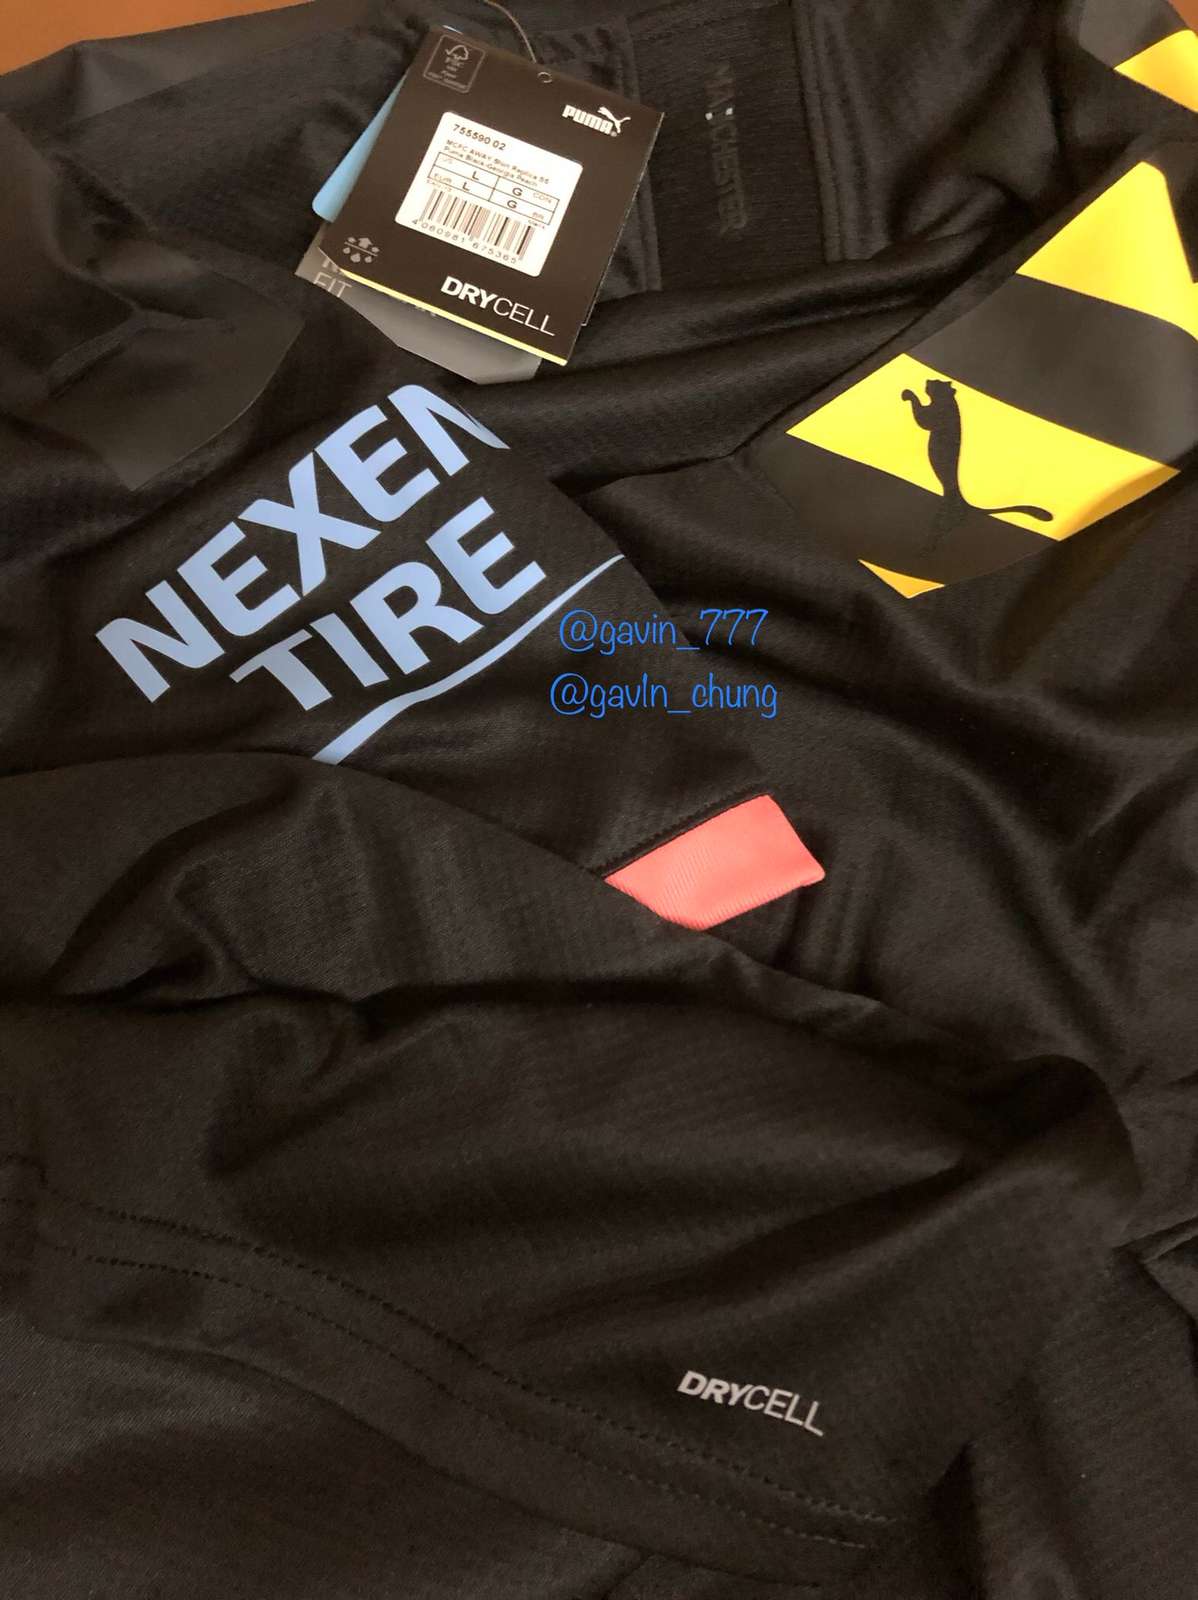 Manchester City 19-20 Away Kit Leaked - New Pictures - Footy Headlines